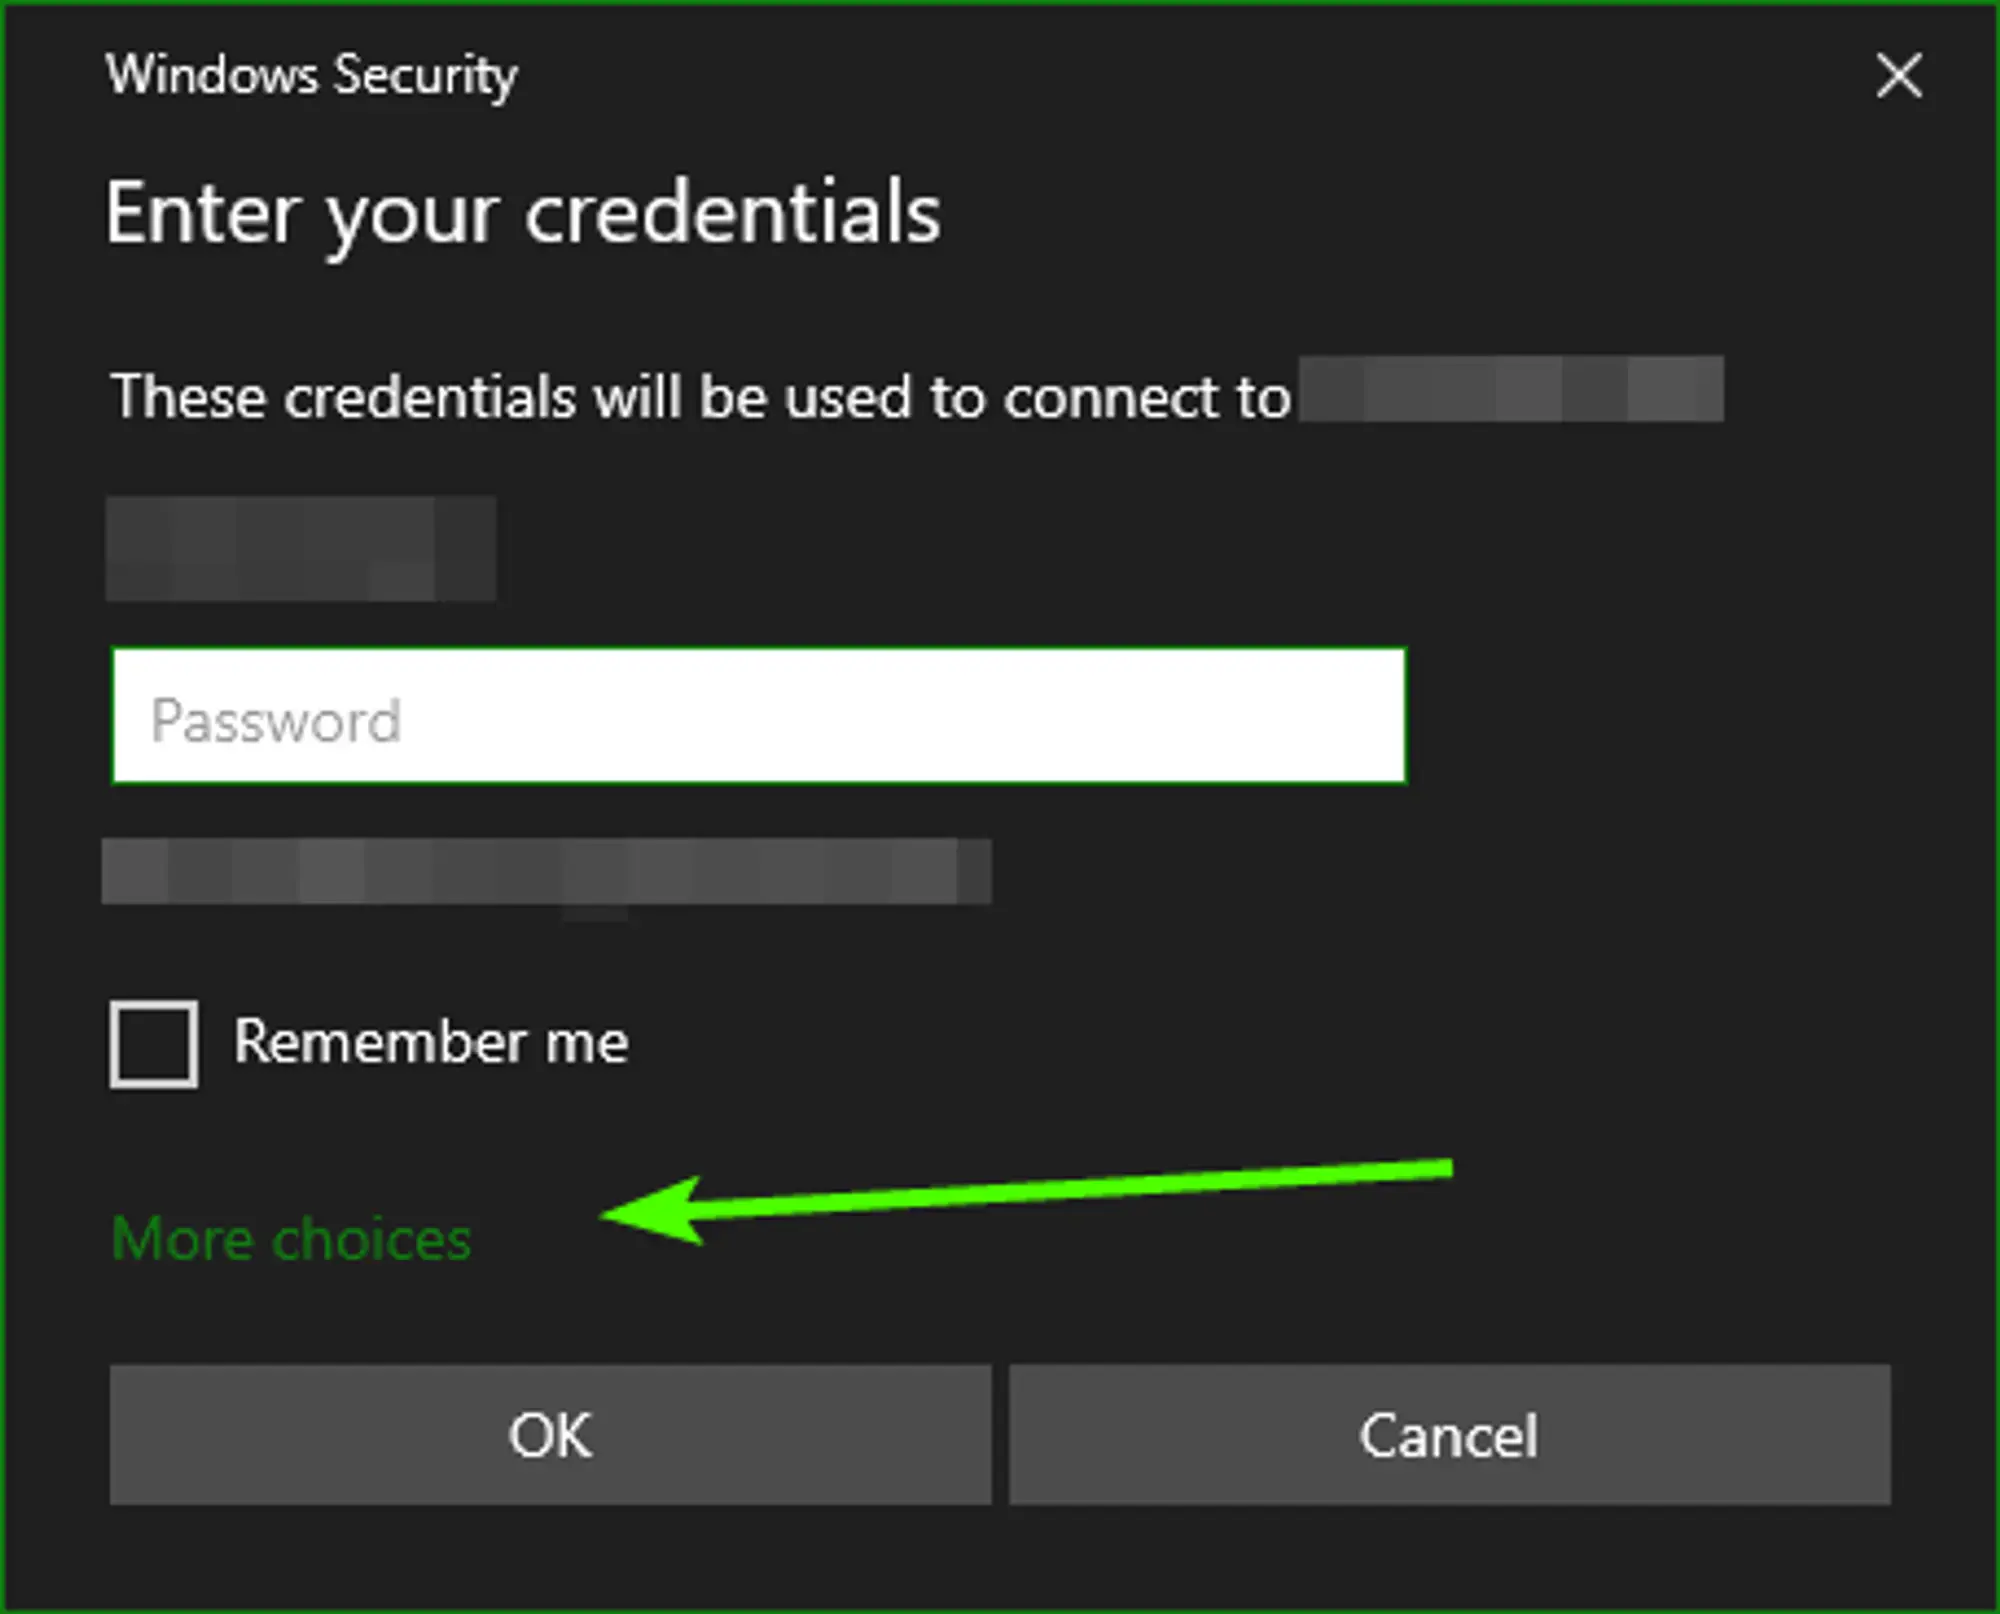 A Windows Security popup with just a password field and an arrow pointing to text that says “More choices”. 